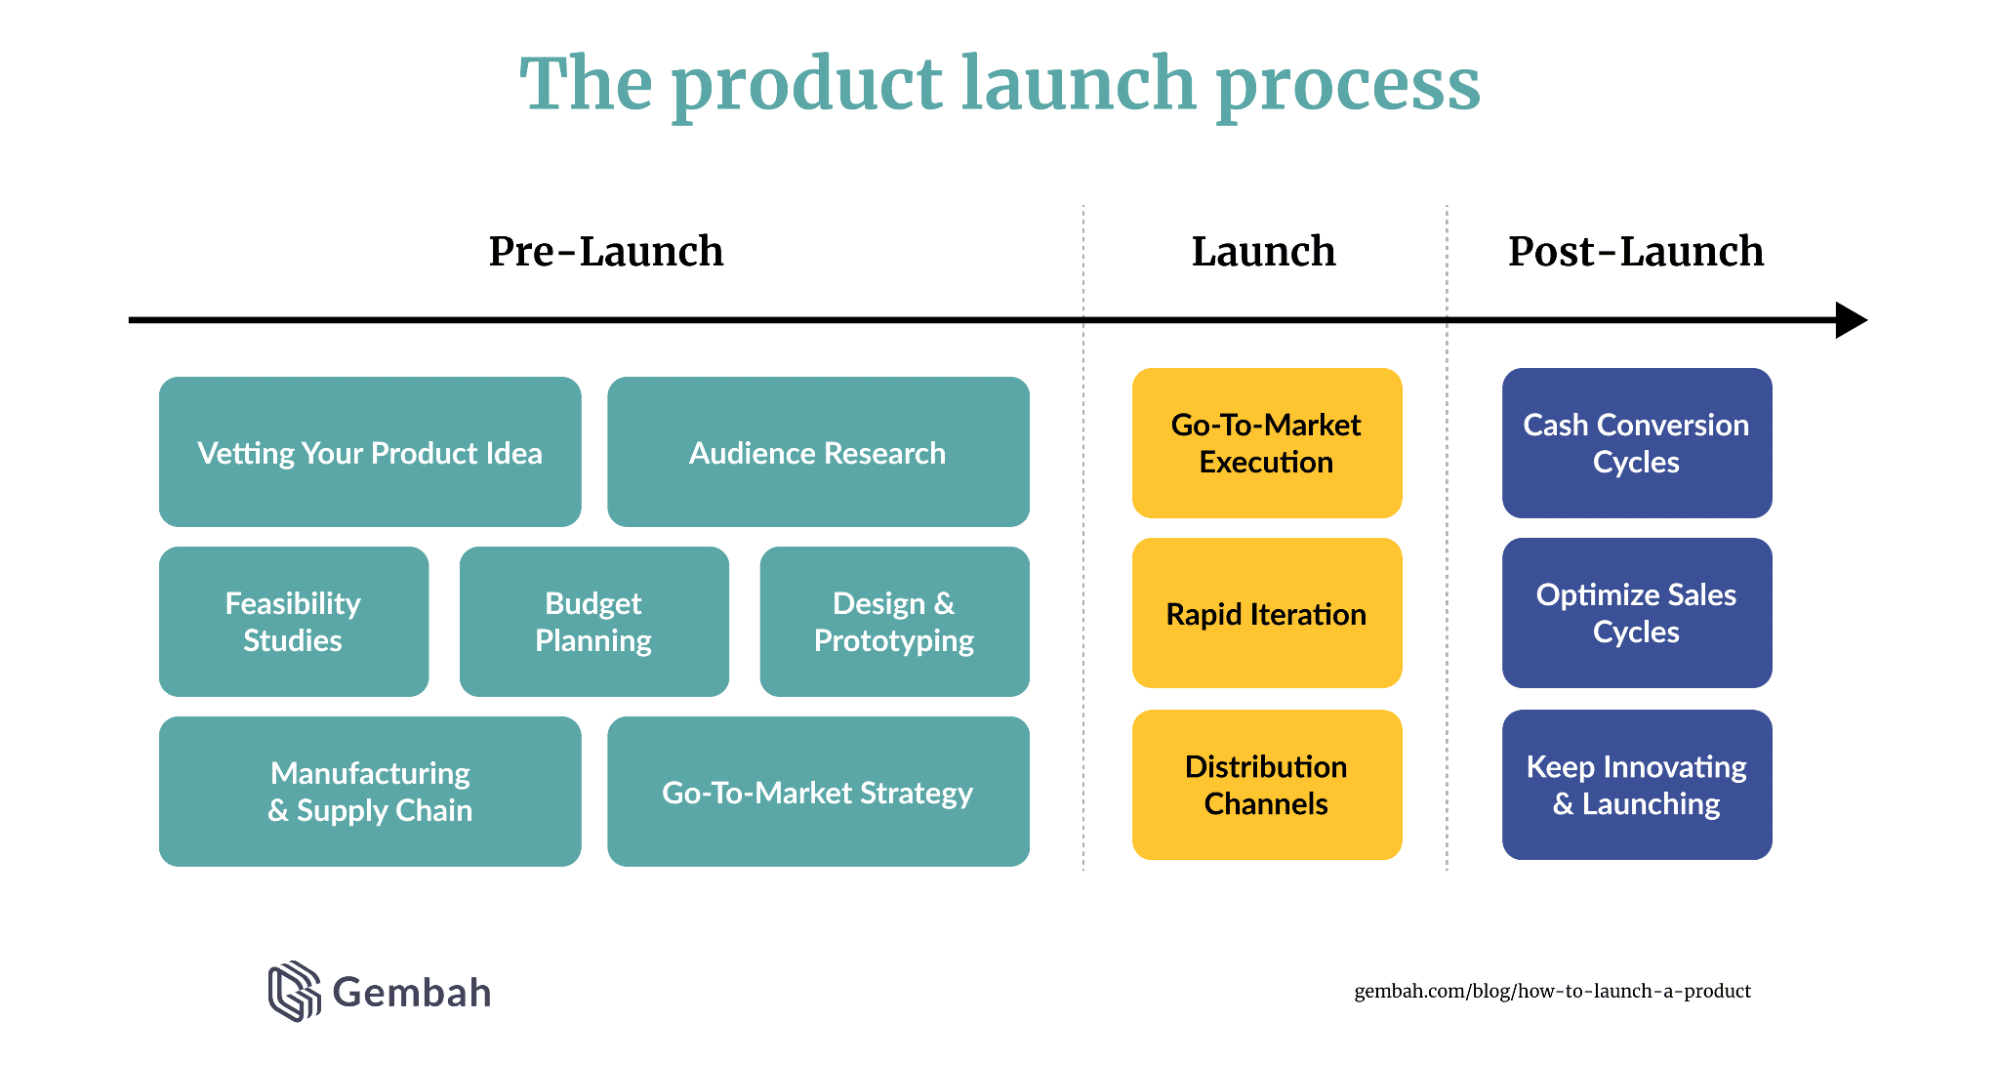 Product Research 2024 Guide: How to Find Profitable Products